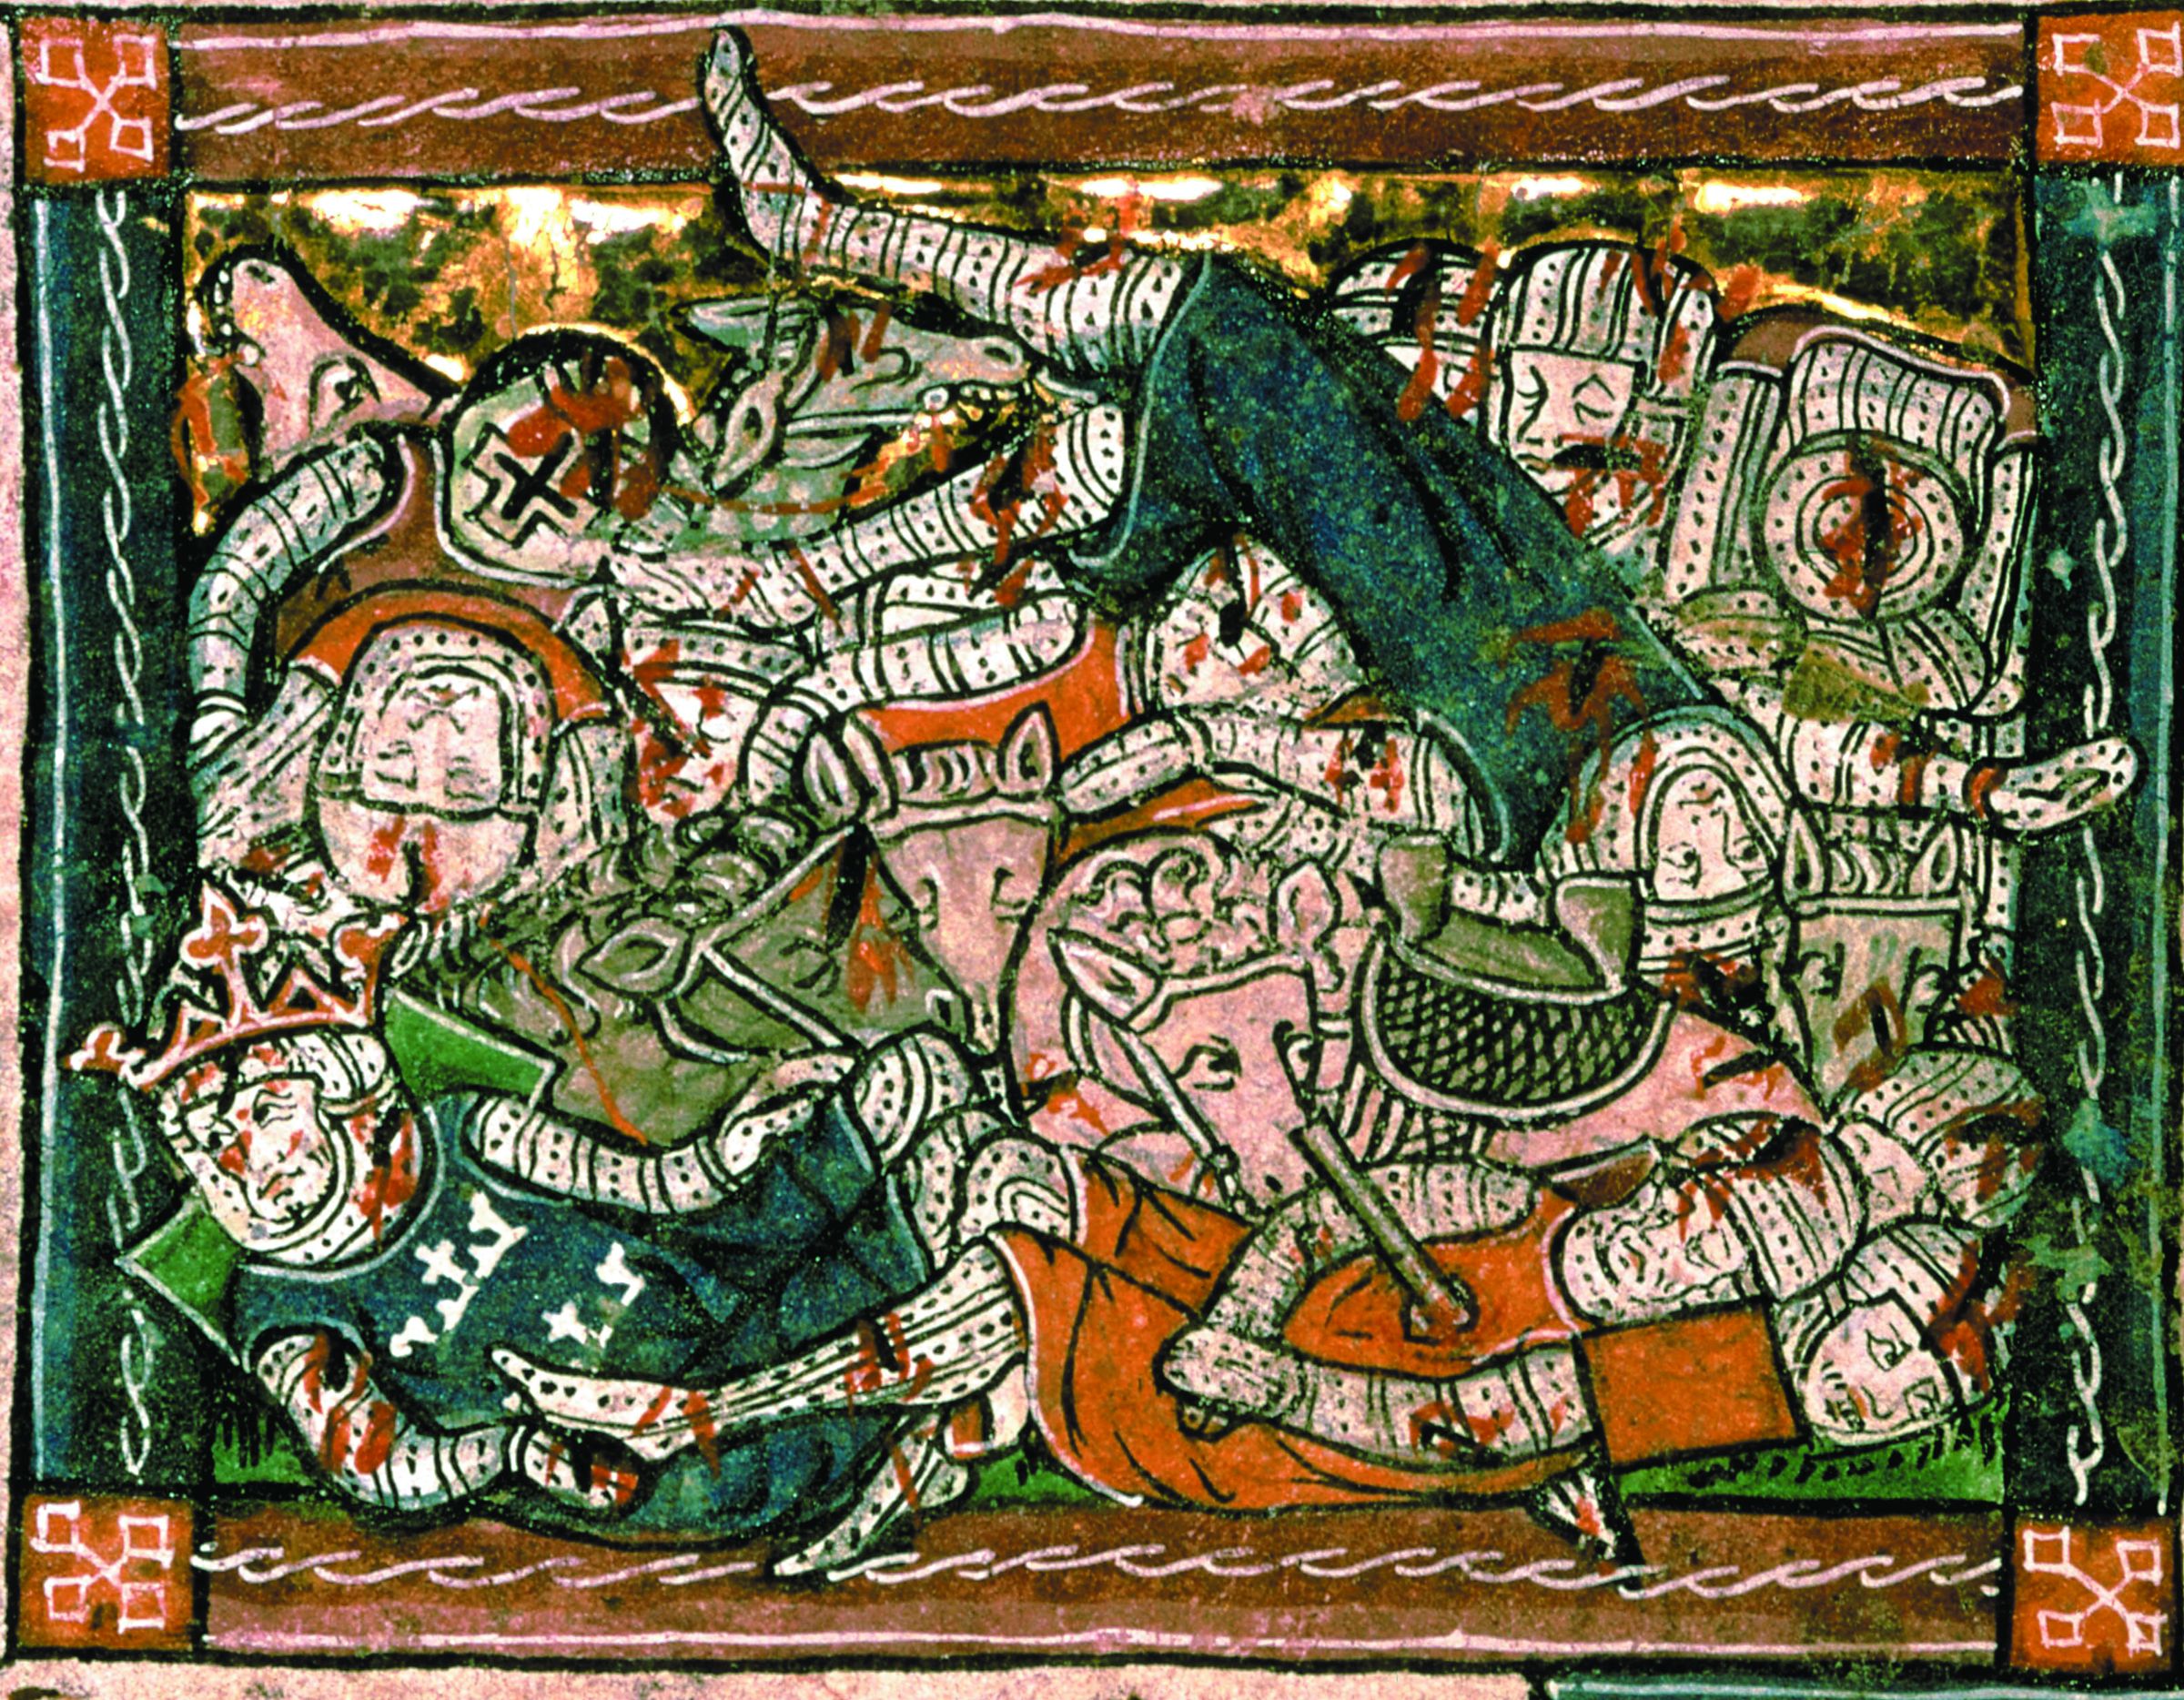 This 13th-century painting depicts Arthur at the Battle of Camlann, where he was slain by one of his own rebellious knights, Medrautus Lancerius, who ran off with Arthur’s wife, Guinevere.